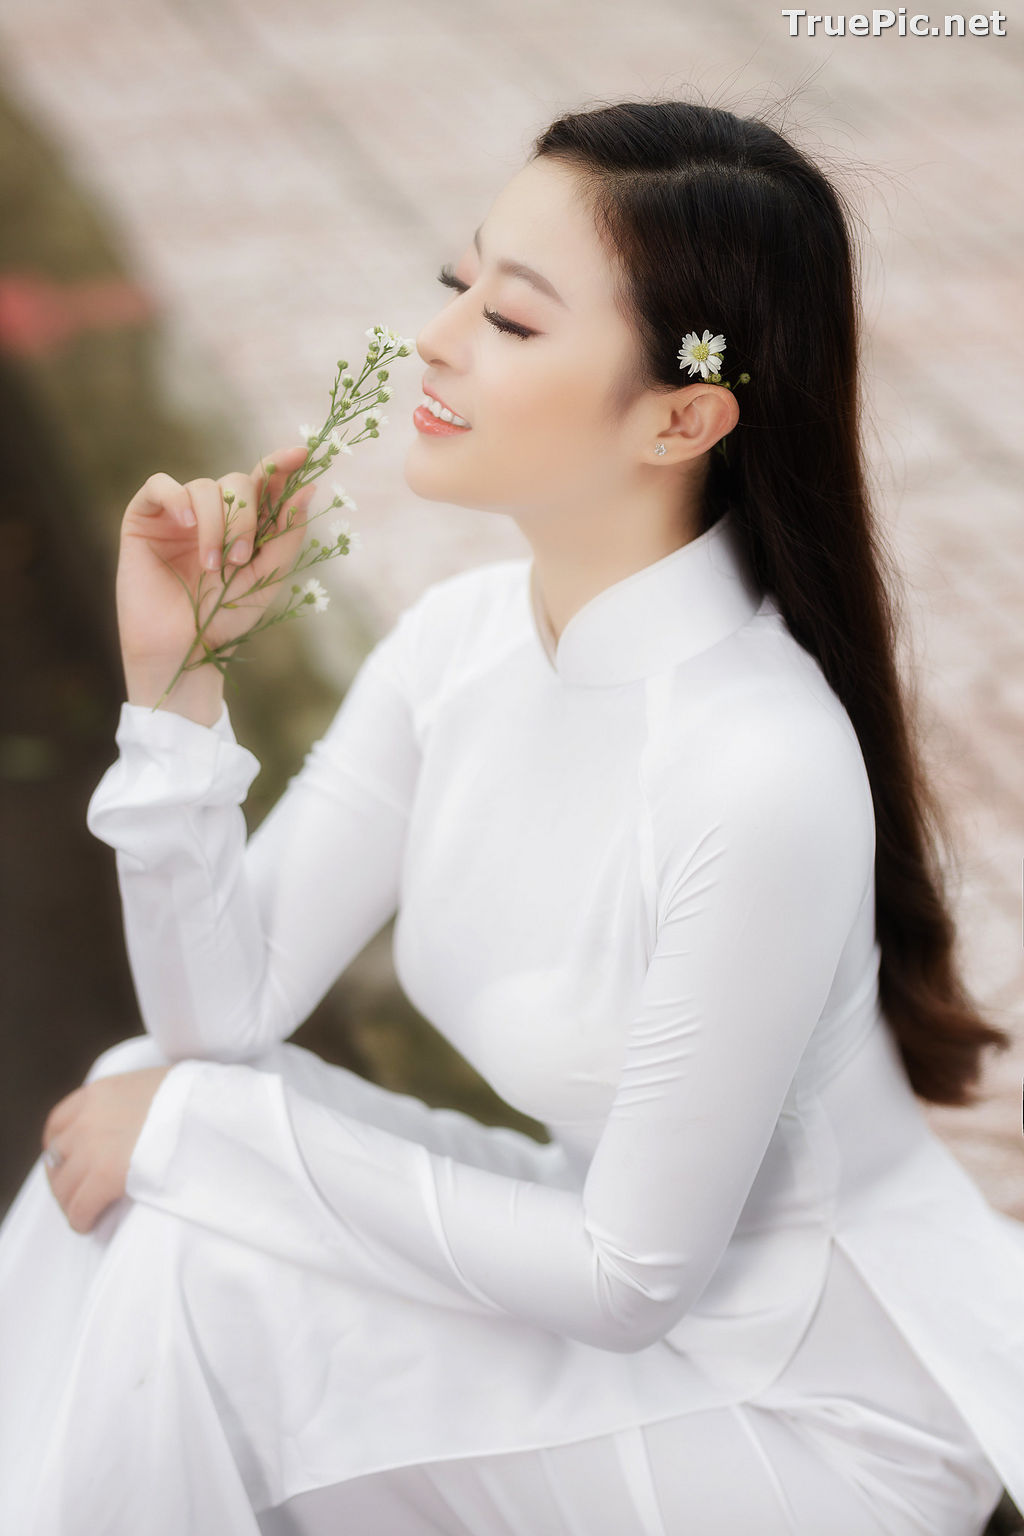 Image The Beauty of Vietnamese Girls with Traditional Dress (Ao Dai) #1 - TruePic.net - Picture-56